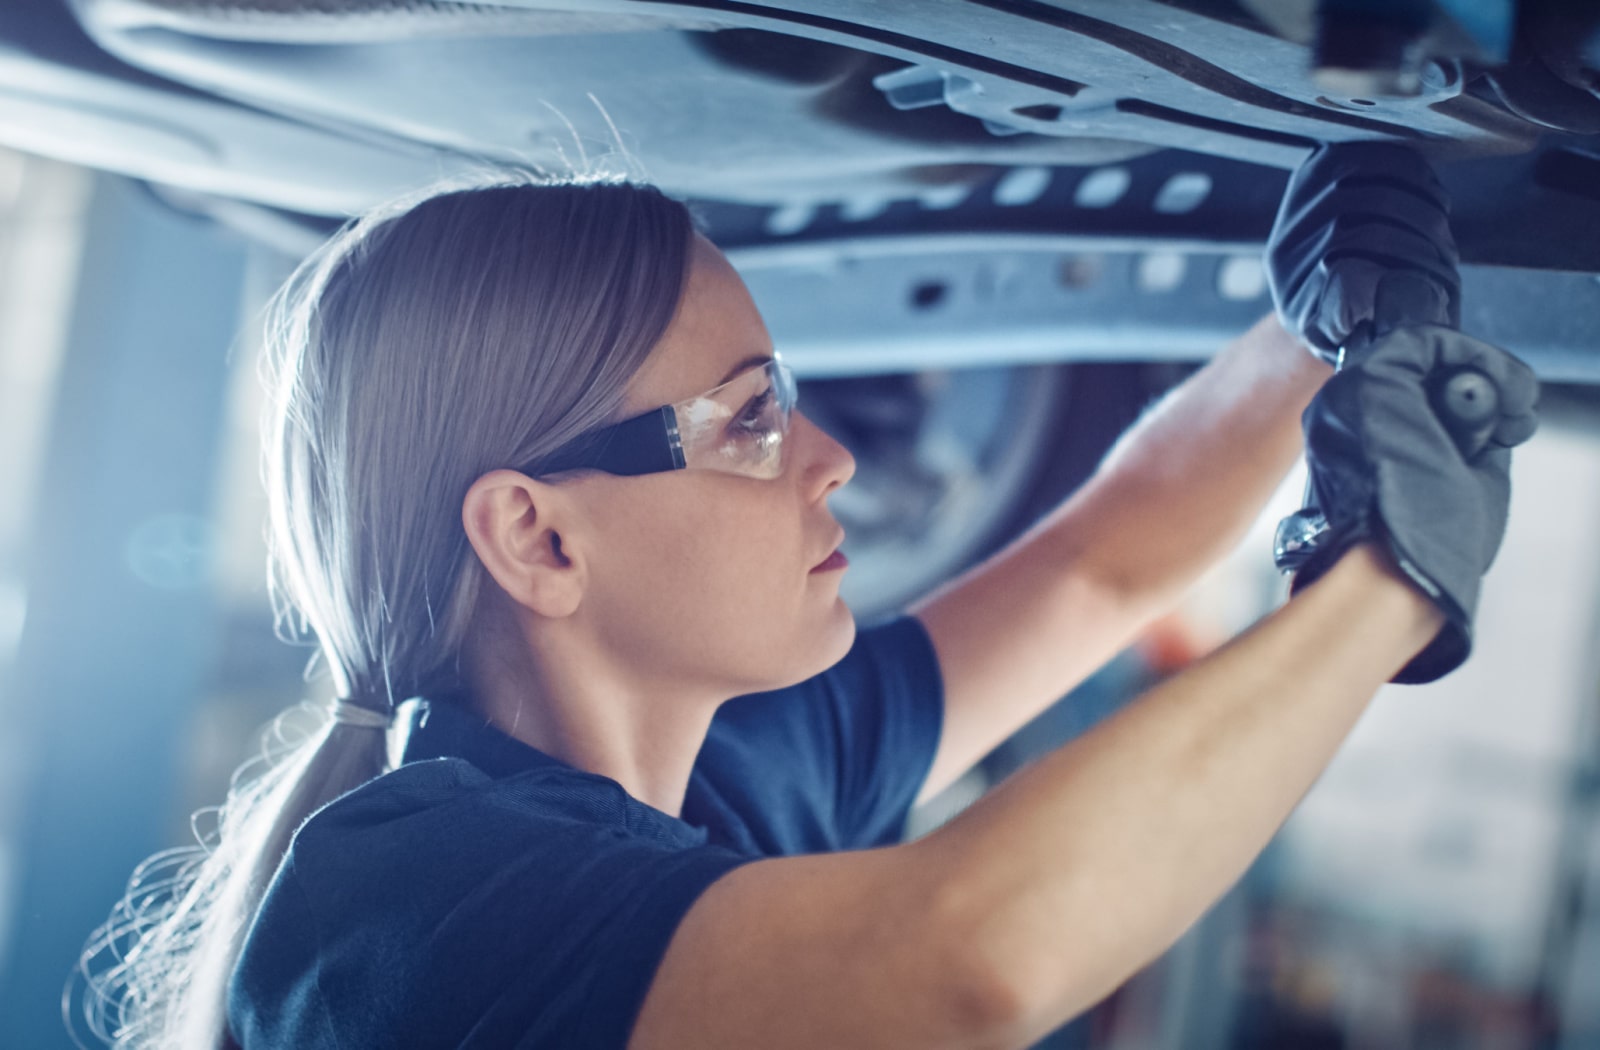 A female mechanic working on a car and wearing prescription safety glasses